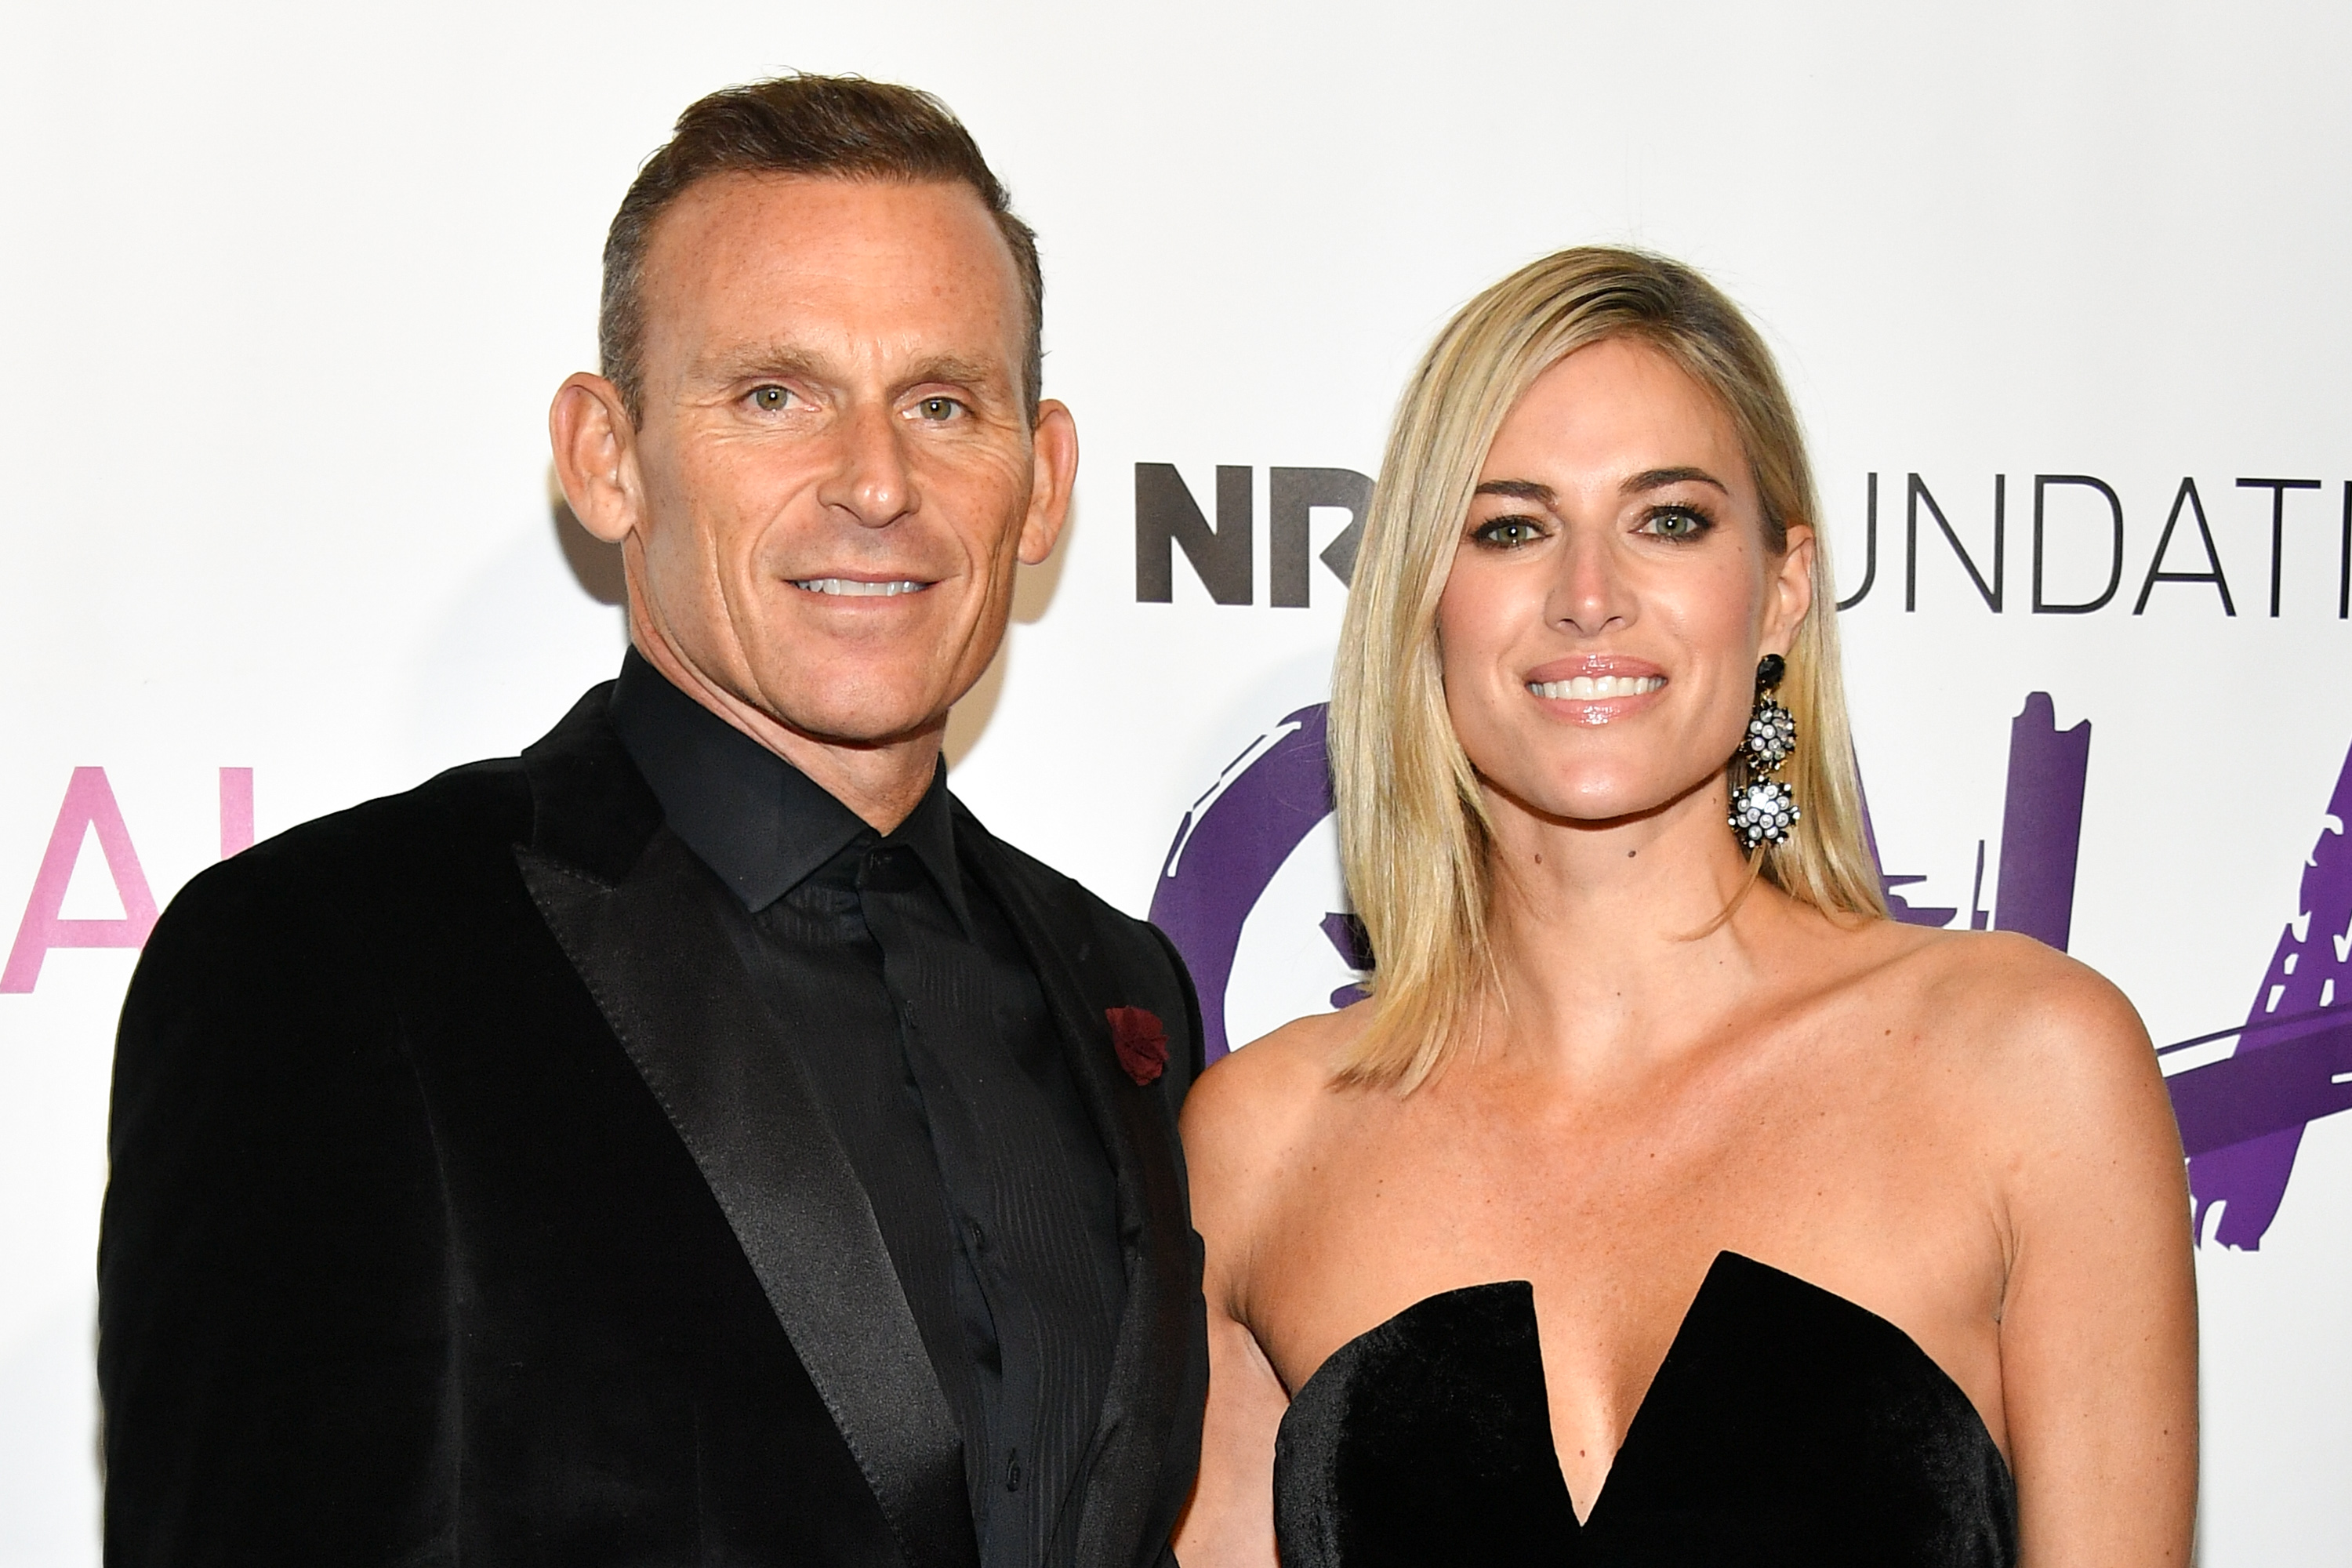 Are Kristen Taekman and Josh Taekman From RHONY Getting a Divorce? Find Out! image pic